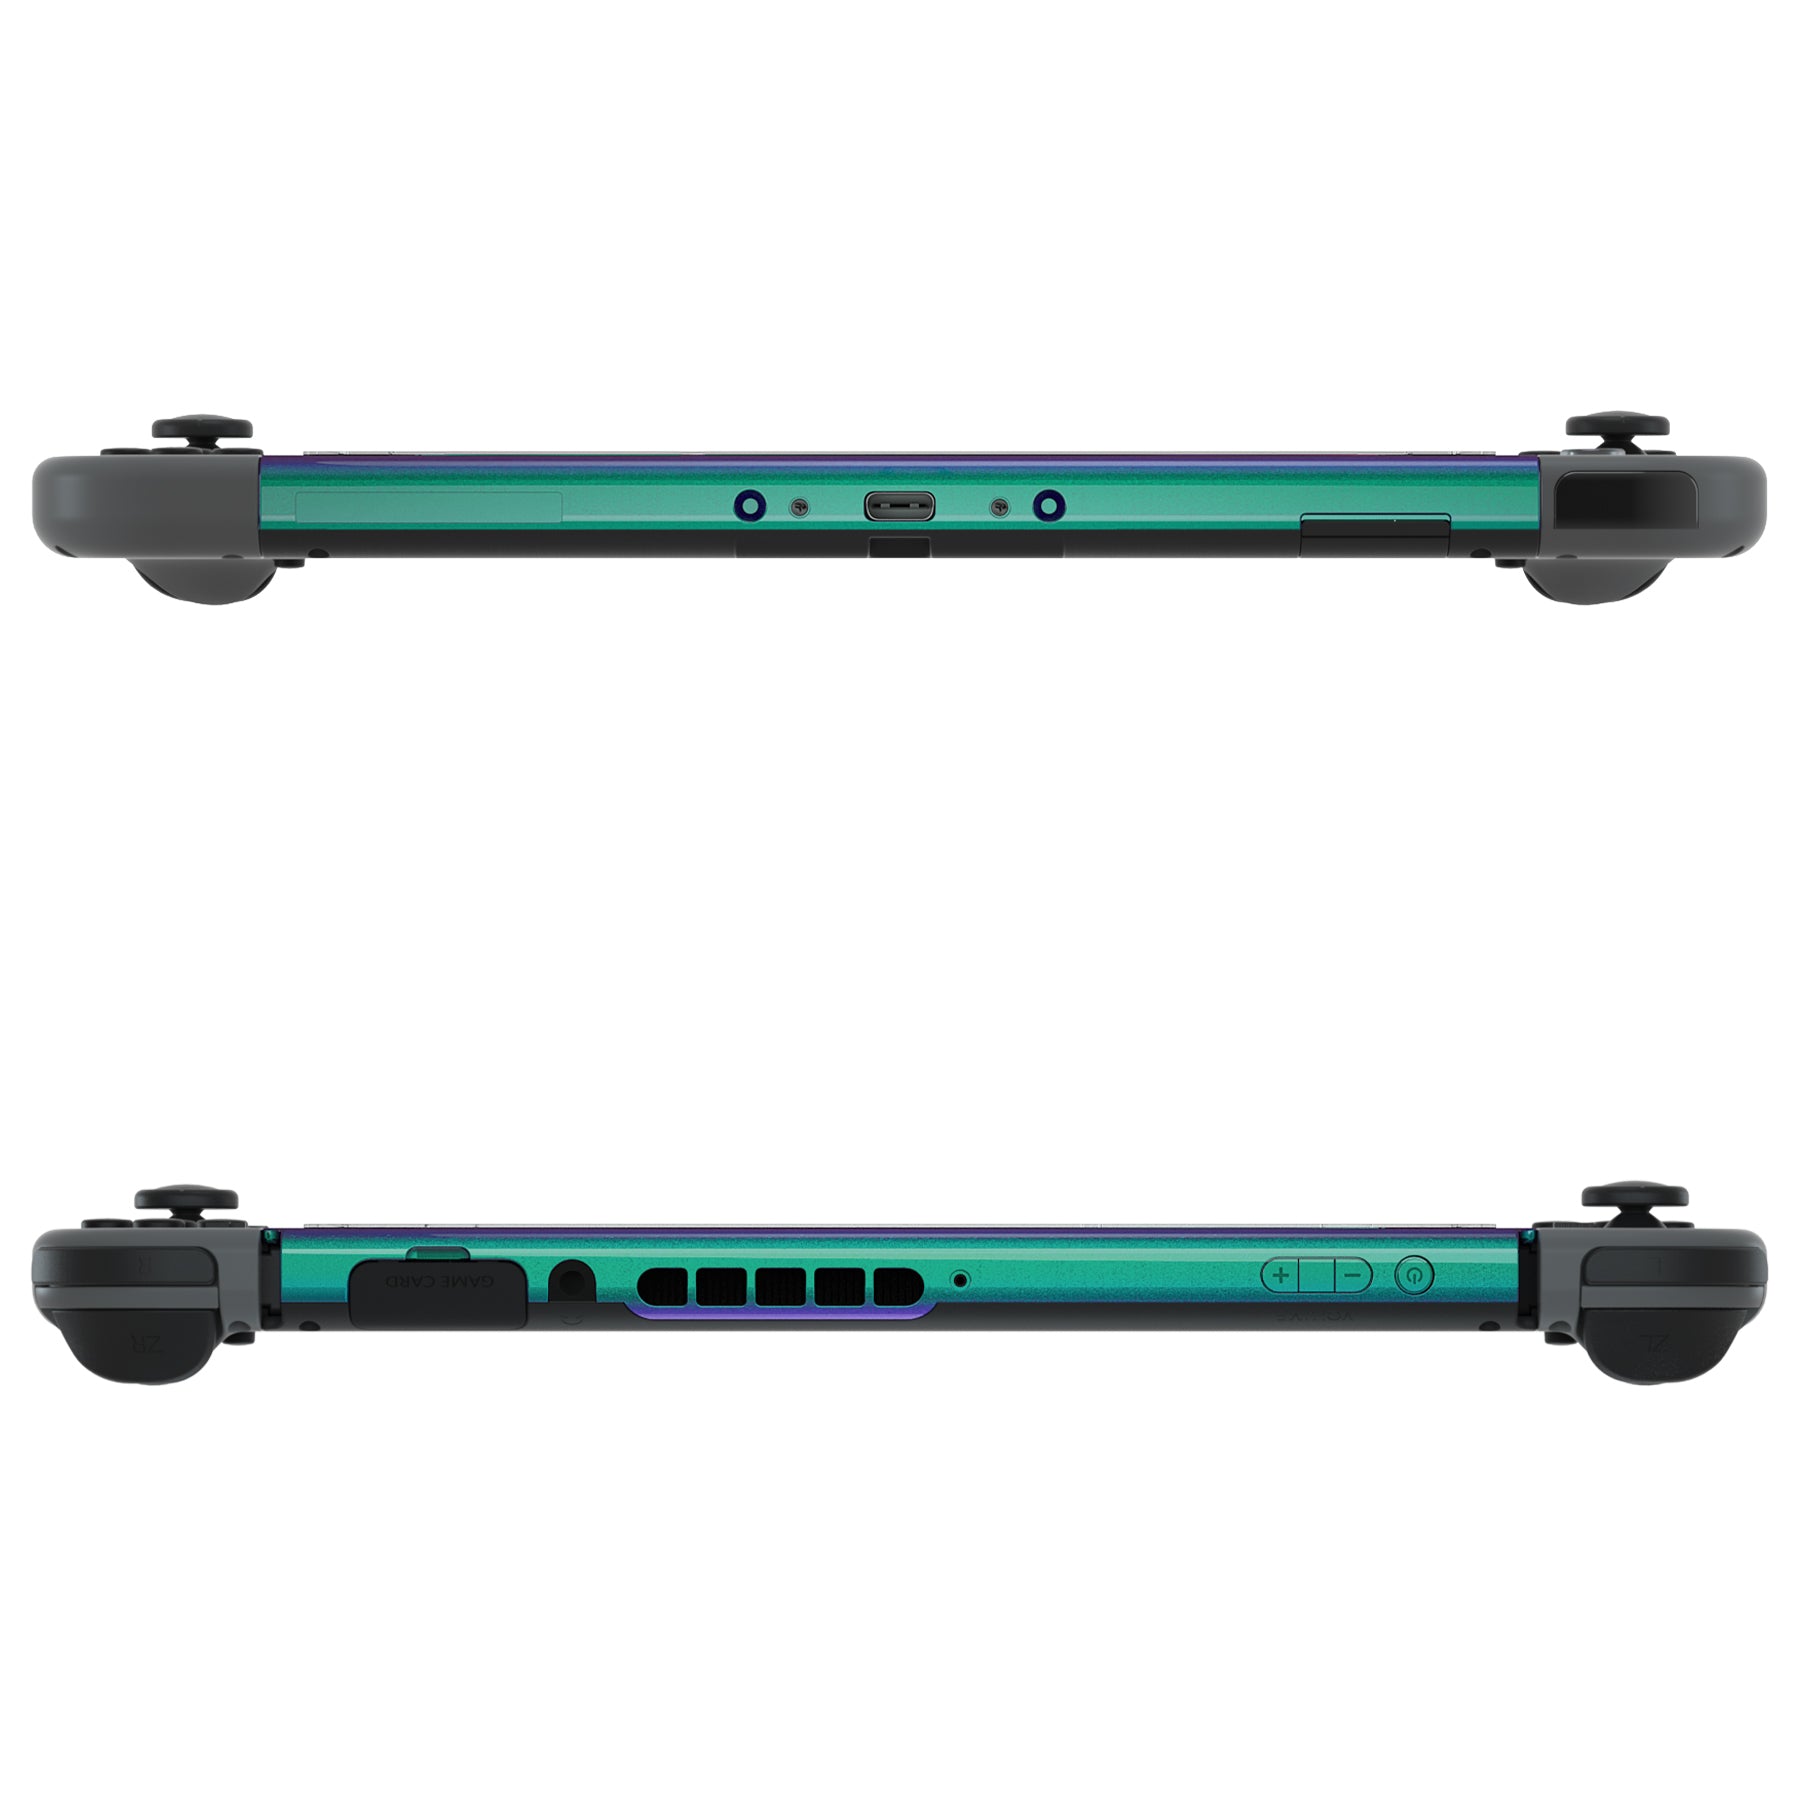 eXtremeRate DIY Replacement Housing Shell Front Frame with Volume Up Down Power Buttons for NS Switch Console - Chameleon Green Purple eXtremeRate